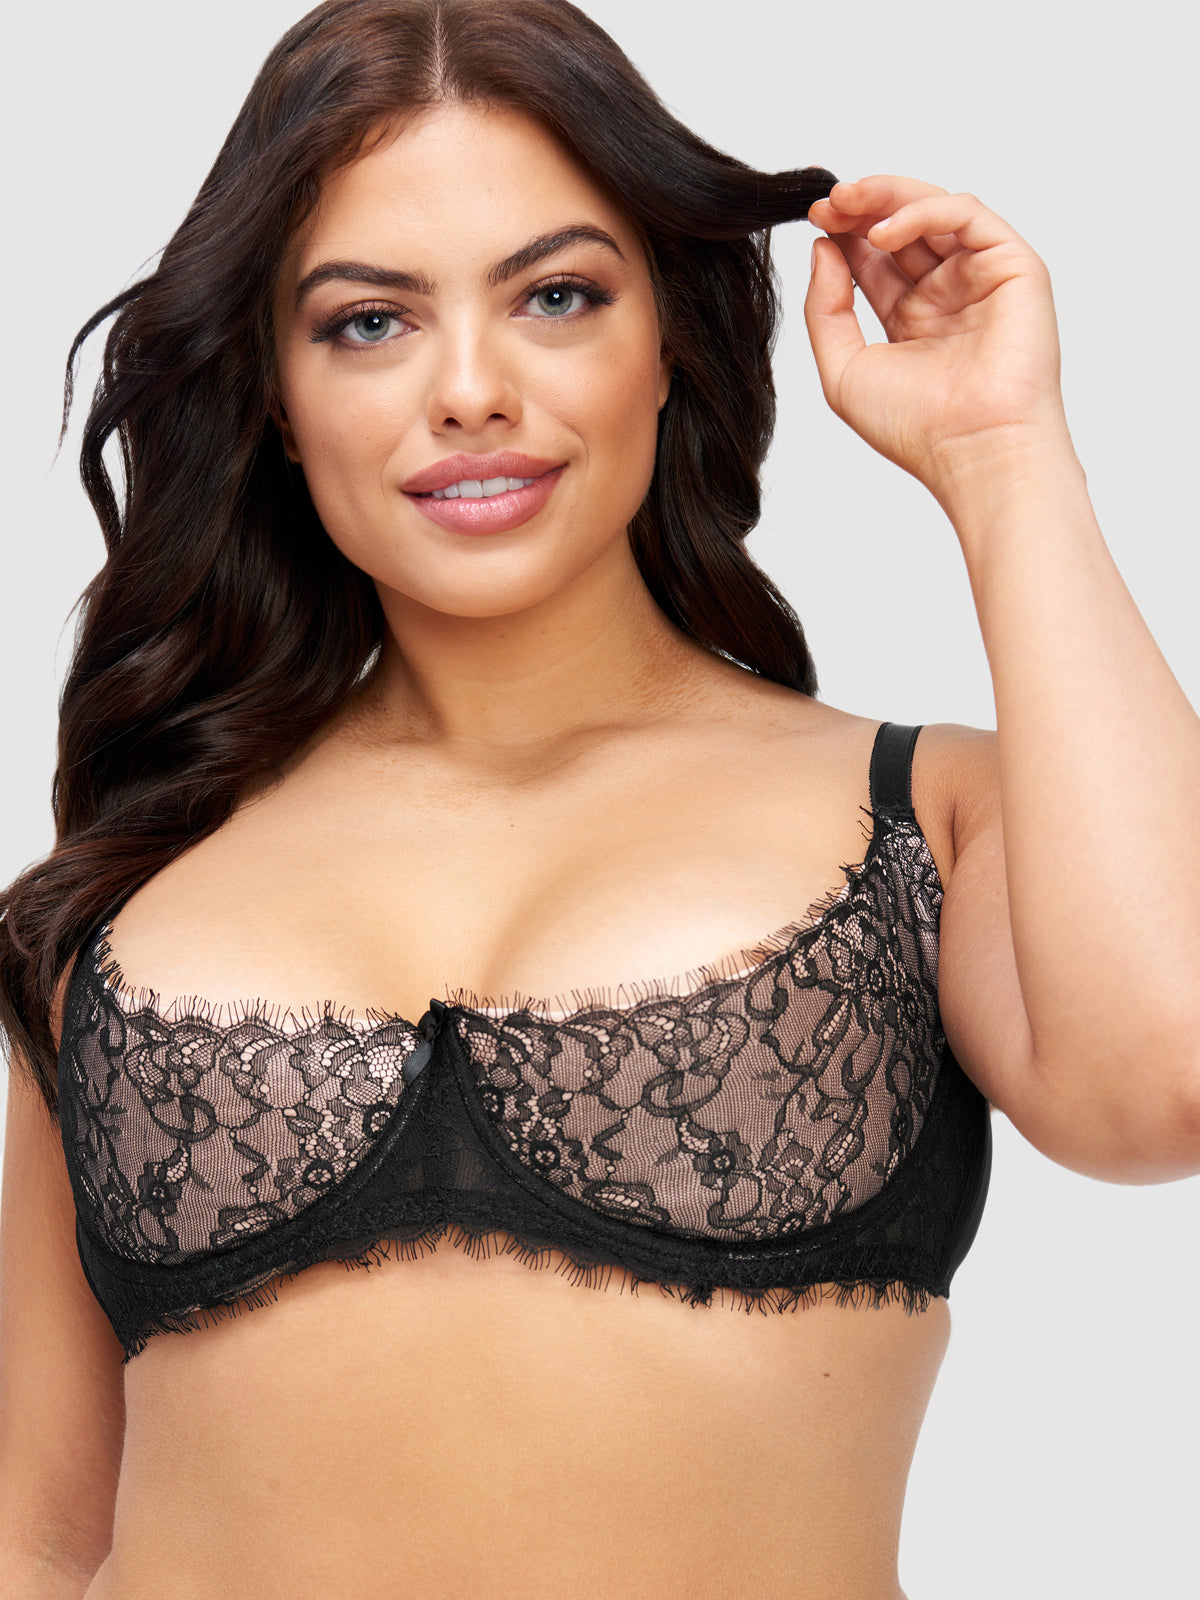 Women's 3/4 Cup Eyelash Plus Size Lace Underwired Bra